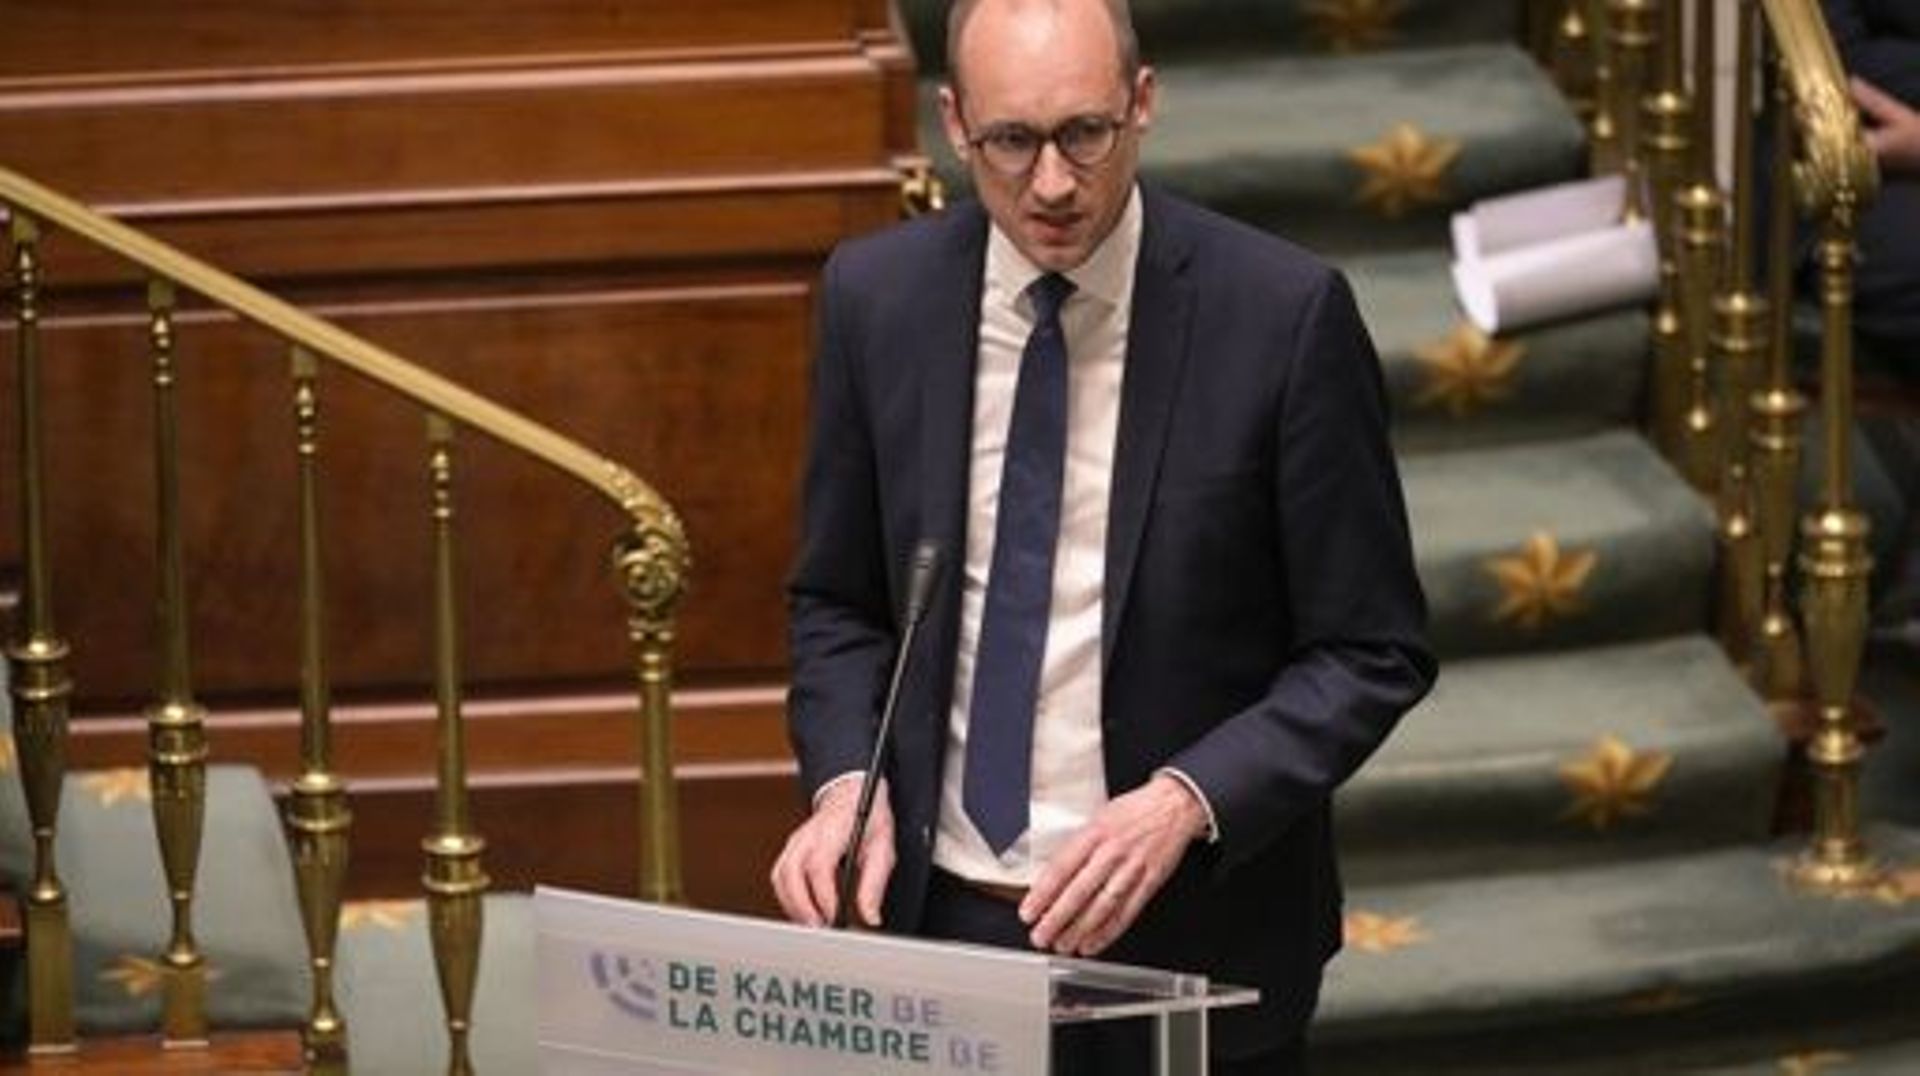 Vice-prime minister and Finance Minister Vincent Van Peteghem pictured during a plenary session of the Chamber at the Federal Parliament in Brussels on Wednesday 17 May 2023. BELGA PHOTO LAURIE DIEFFEMBACQ